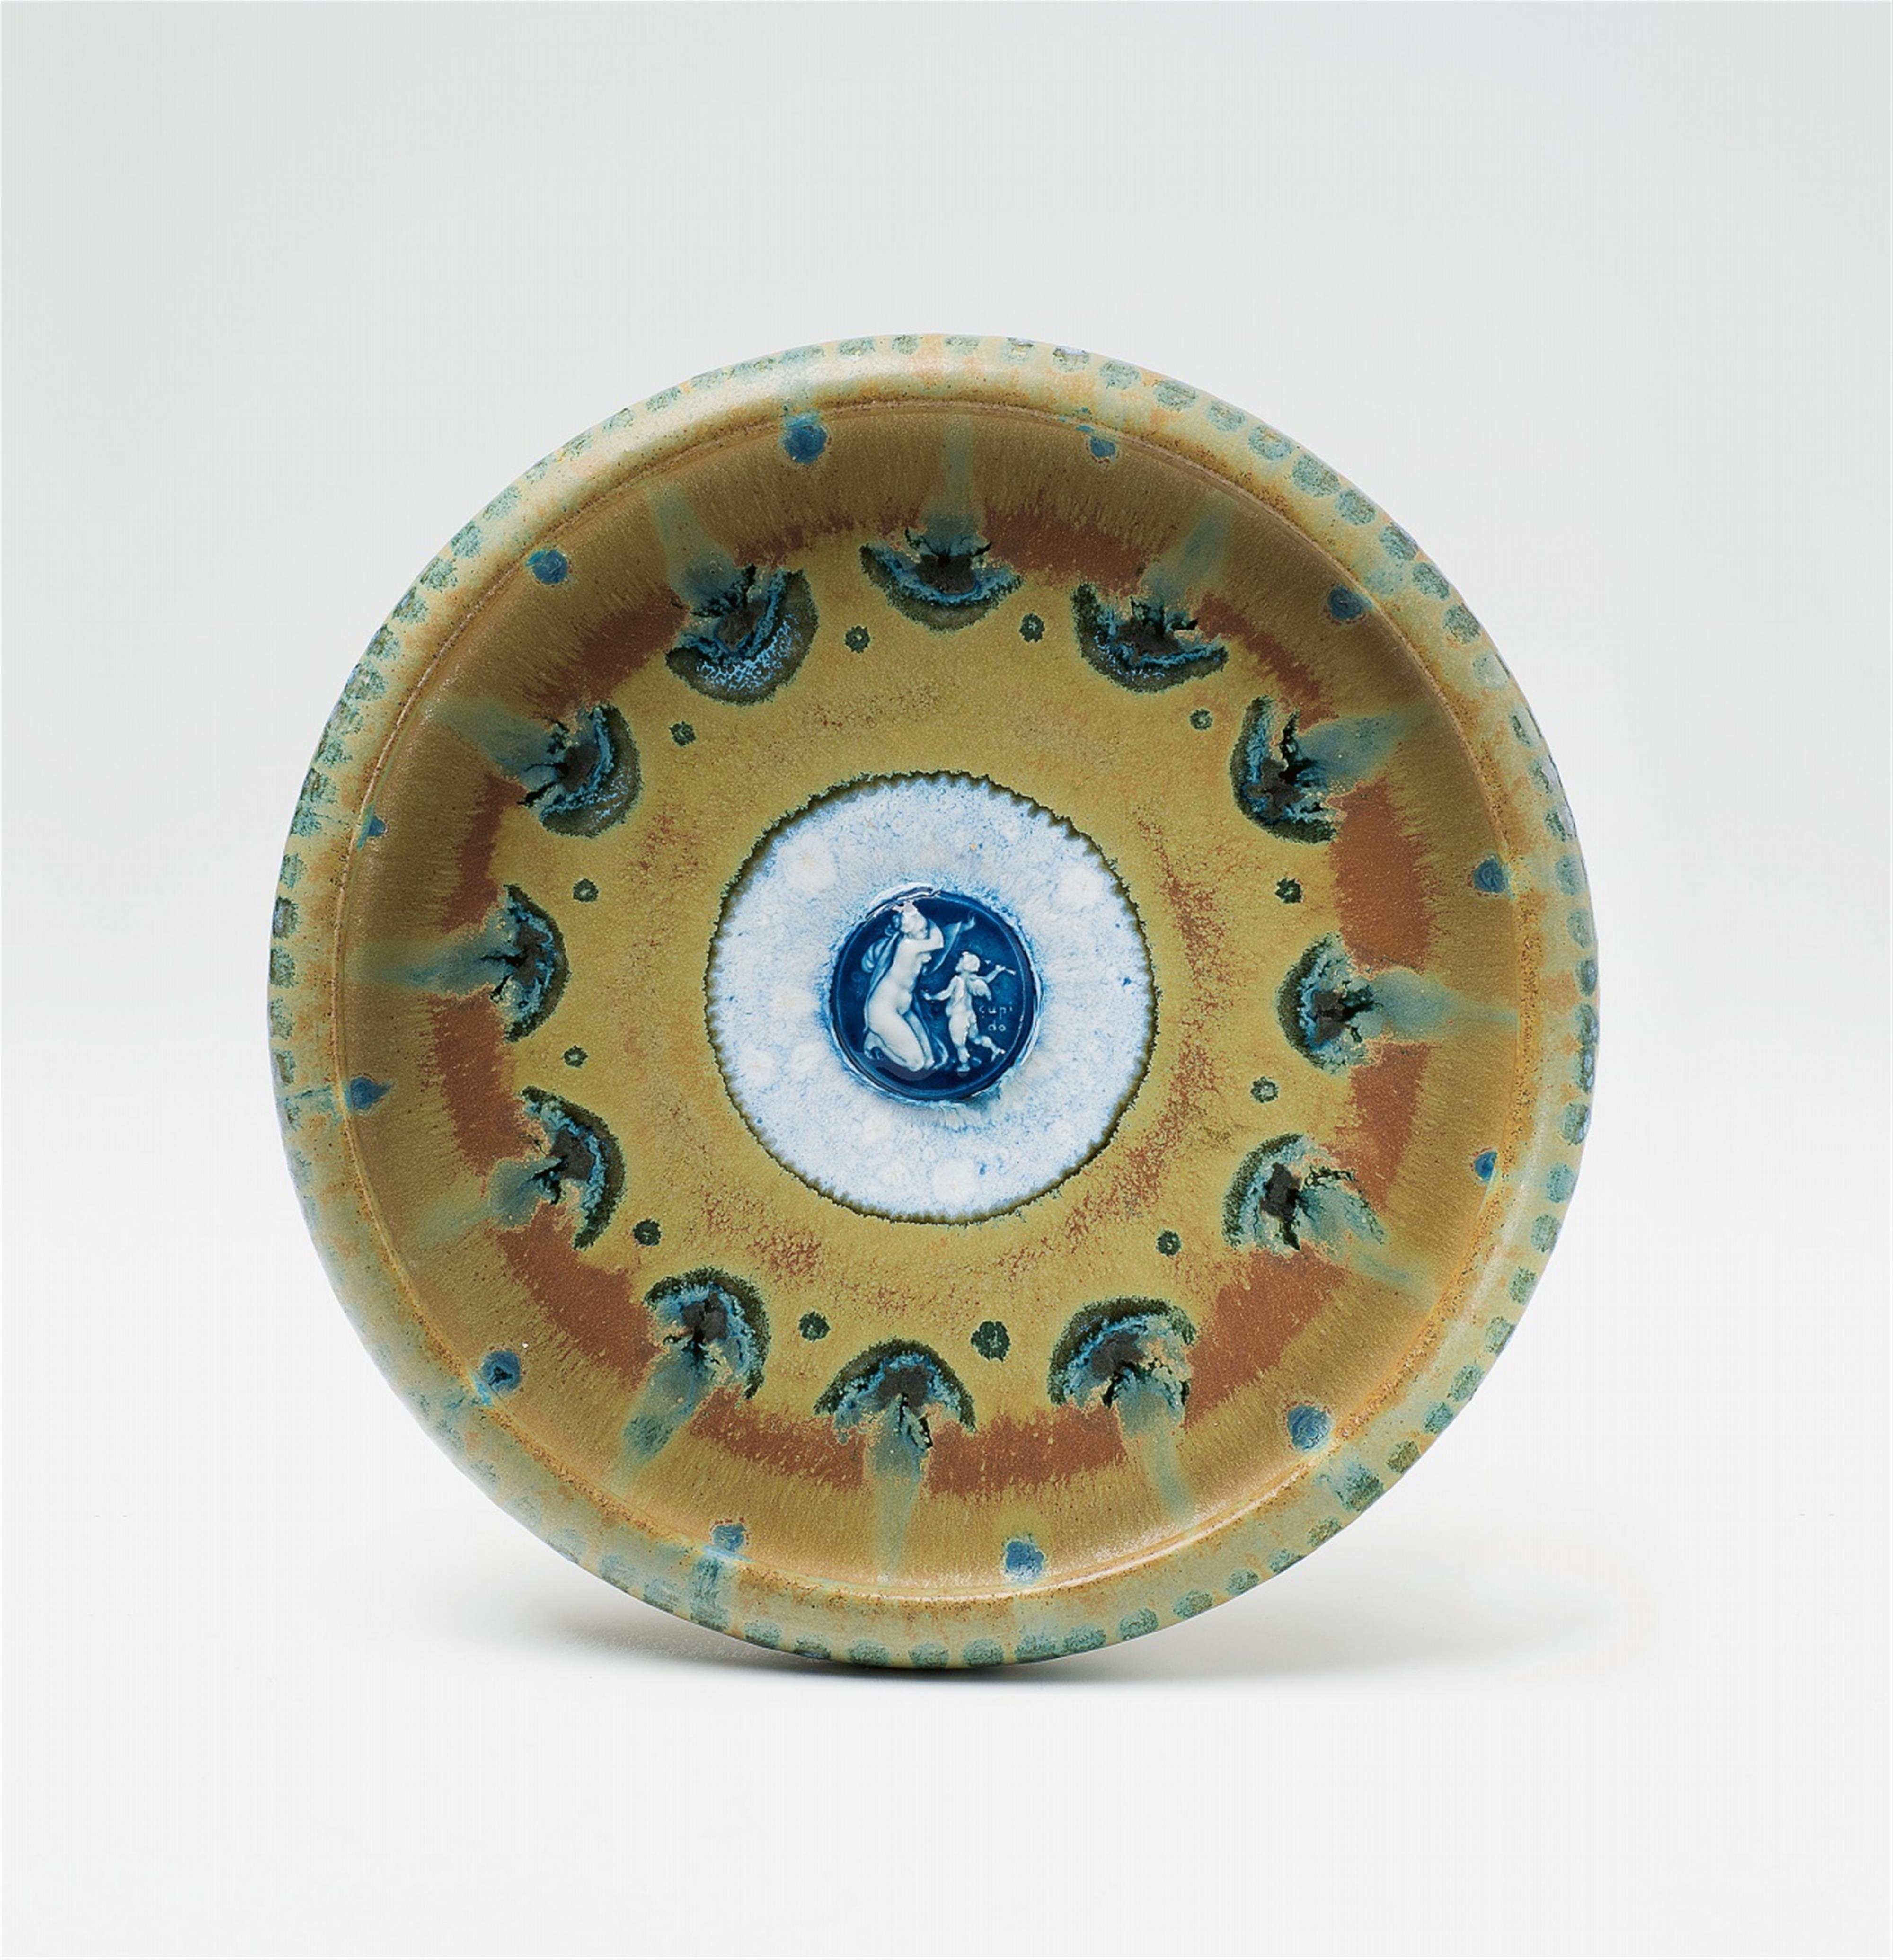 A Sèvres porcelain dish with Cupid by Taxile Doat - image-1